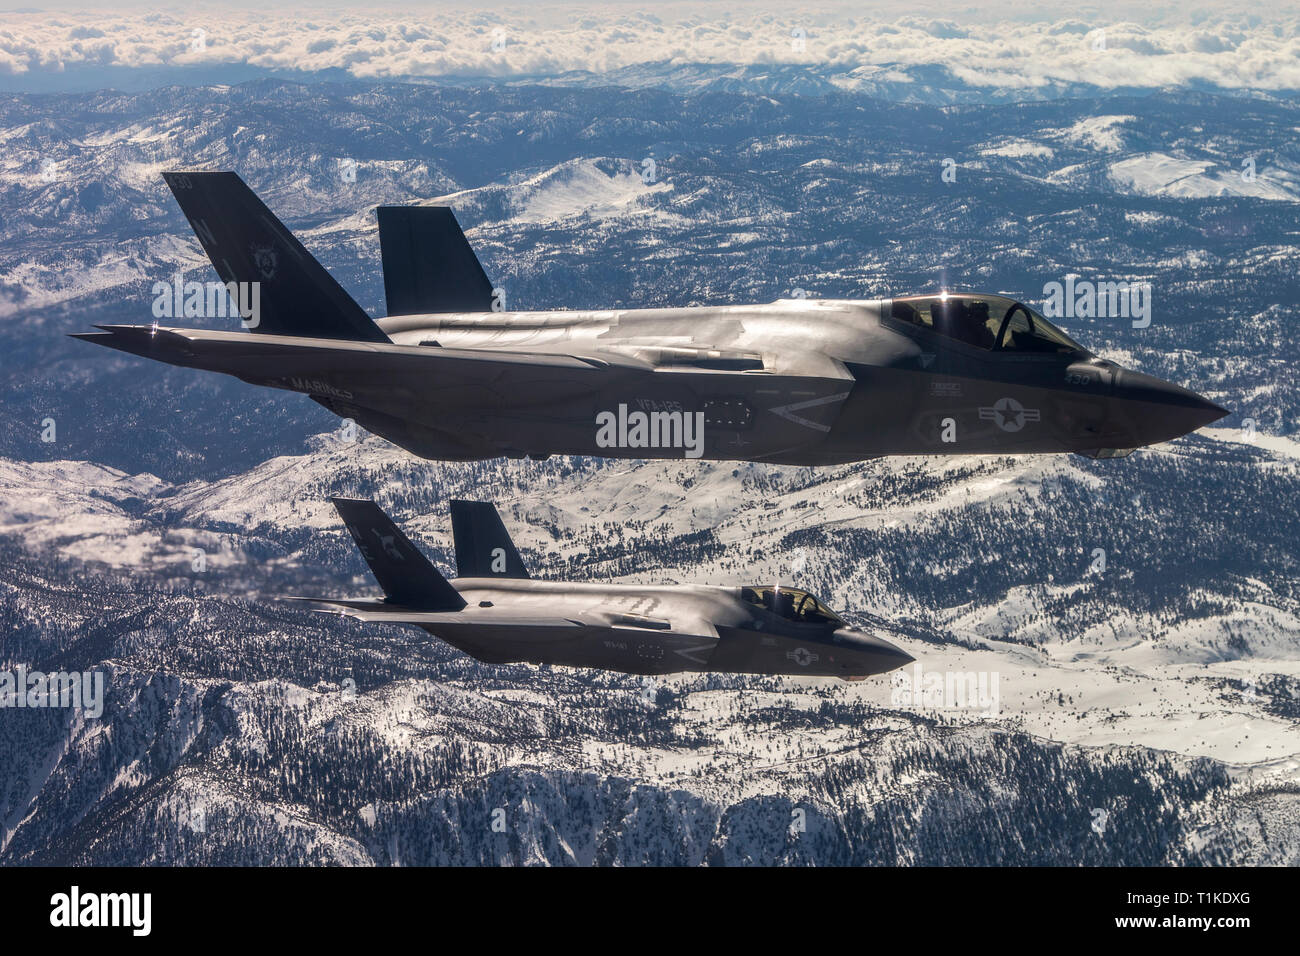 U.S. Navy F-35C Lightning II stealth fight aircraft with Strike Fighter Squadron 125 fly in formation over the Sierra Nevada mountains during a training exercise February 28, 2019 over Lemoore, California. Stock Photo